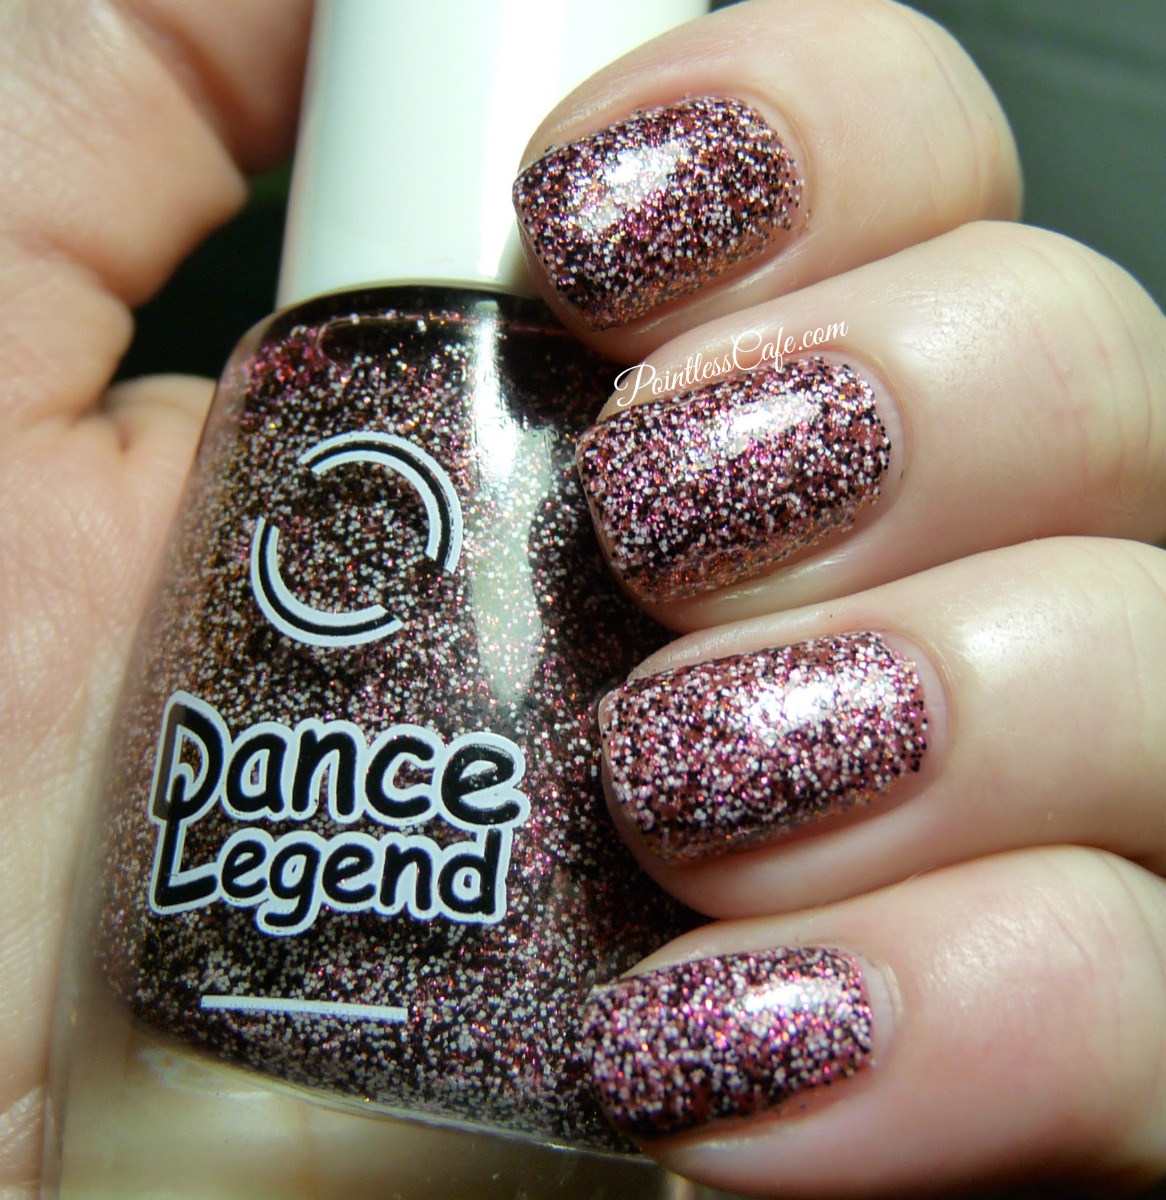 Dance Legend: The Caviars - Swatches and Review | Pointless Cafe